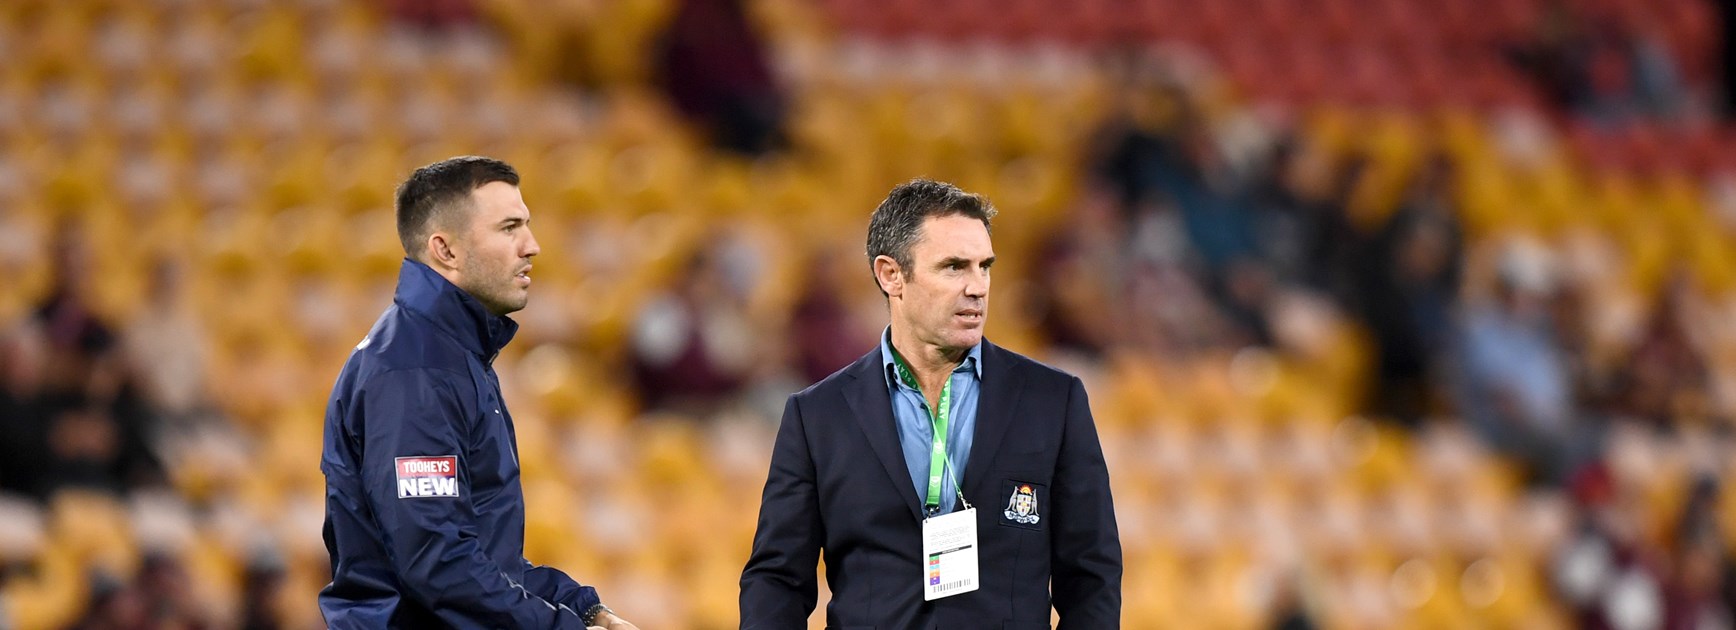 Fittler: Defeat will make series 'just another win'